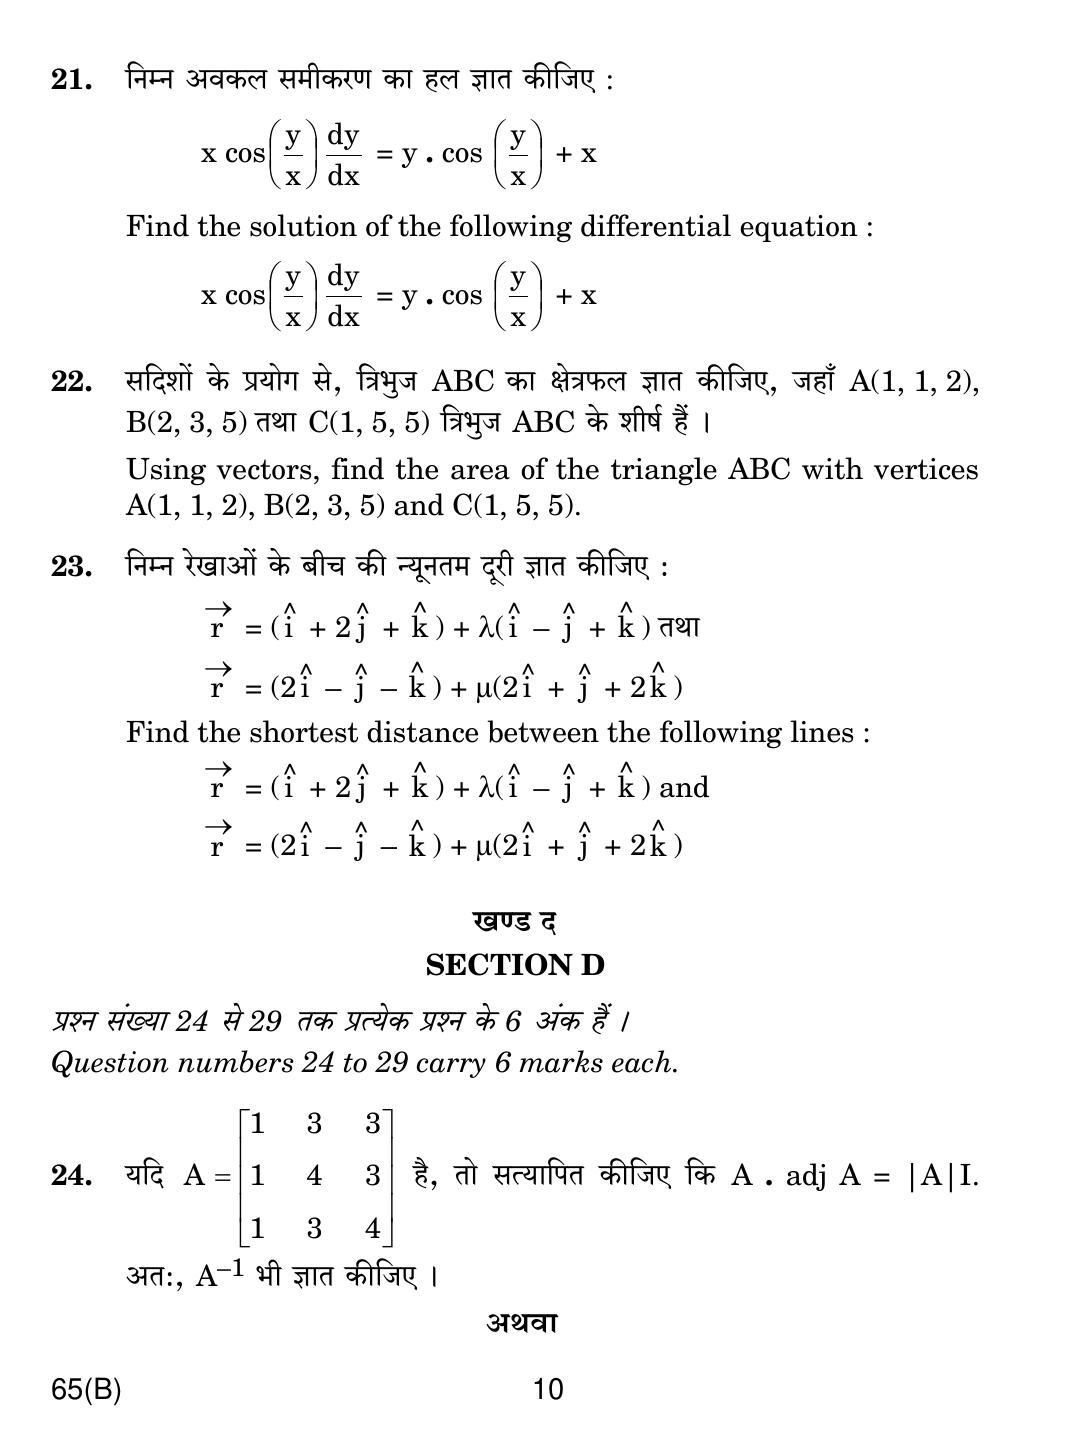 CBSE Class 12 65(B) MATHS For Blind Candidates 2019 Compartment Question Paper - Page 10